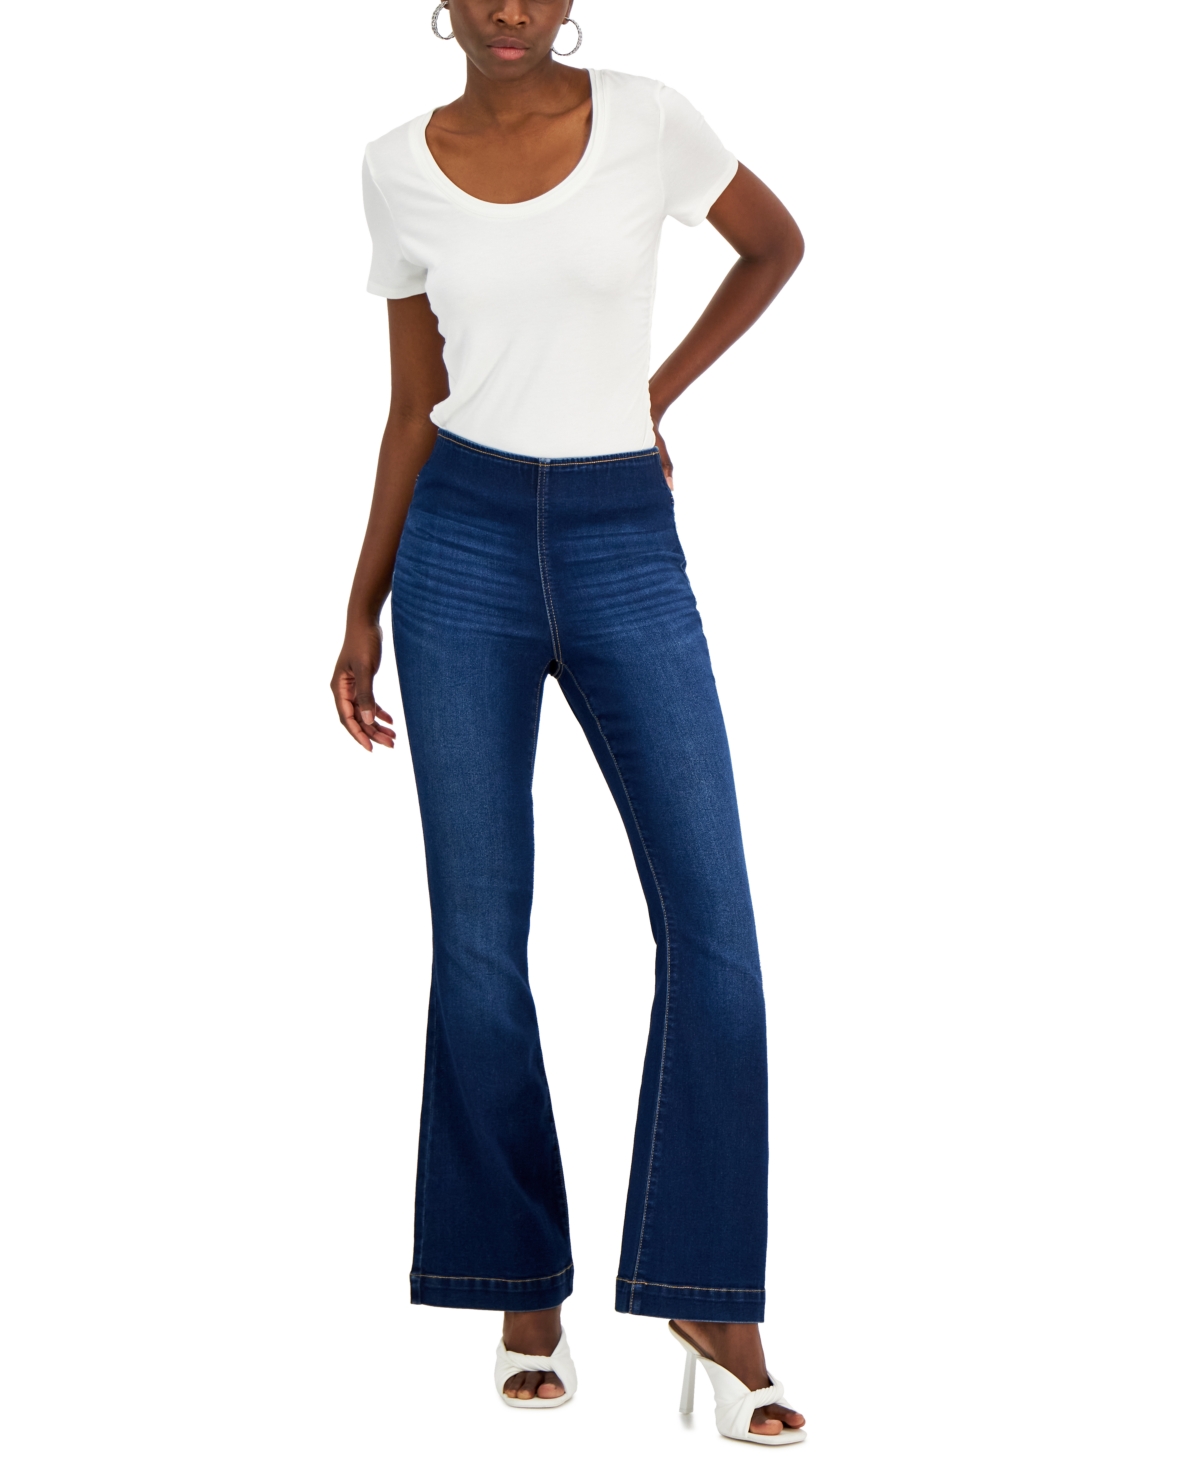  Inc International Concepts Women's High Rise Pull-On Flare Jeans, Created for Macy's